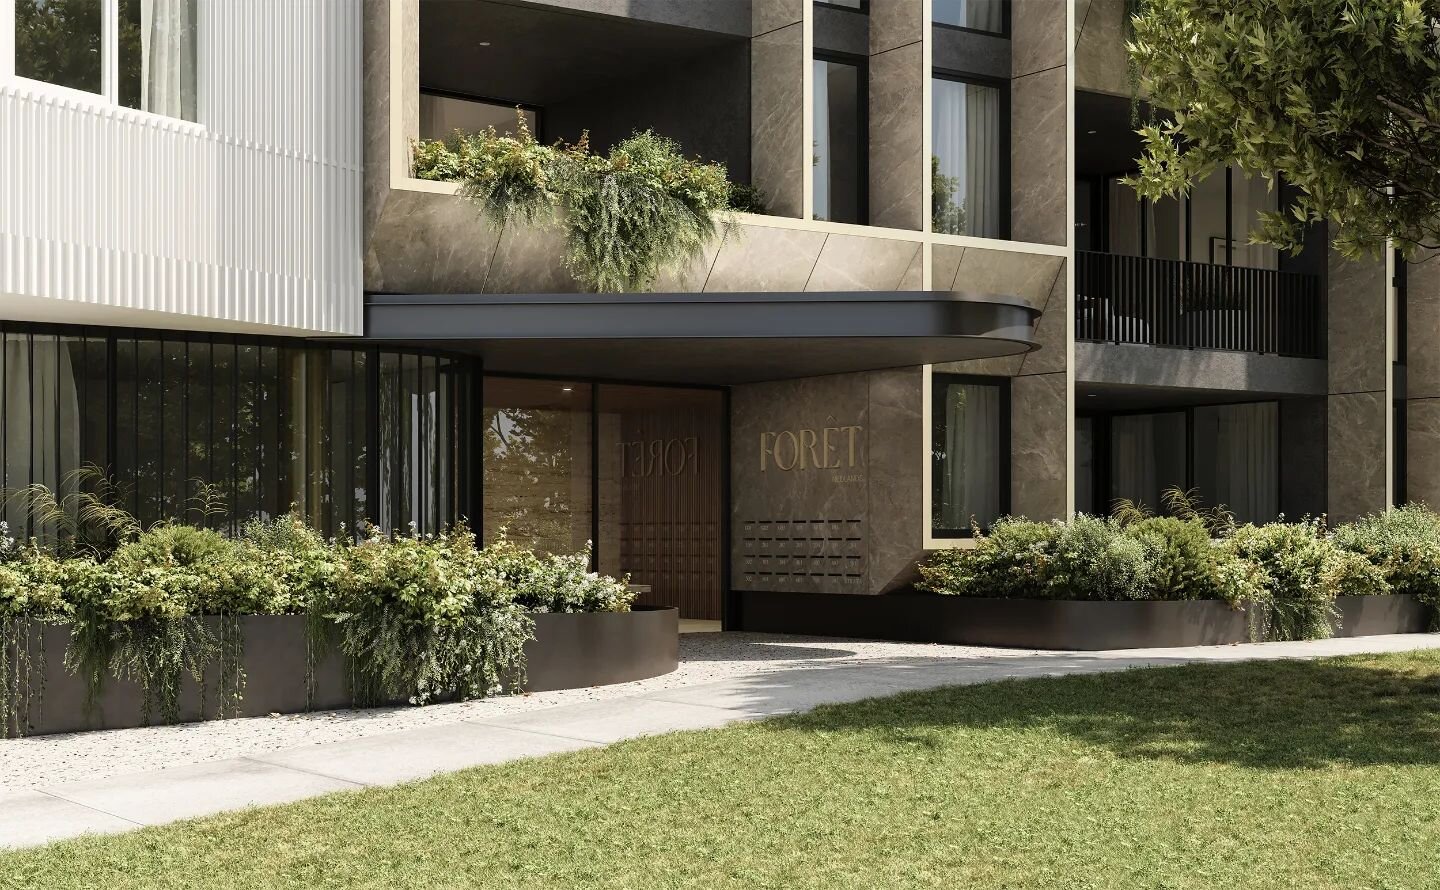 The entry of For&egrave;t Nedlands uses warm, textural materials, sculptural forms and lush landscaping to gently engage with the street.

Project launching soon and starting construction later this year. 

@jonesrealty_projects
@housebusinessgroup 
